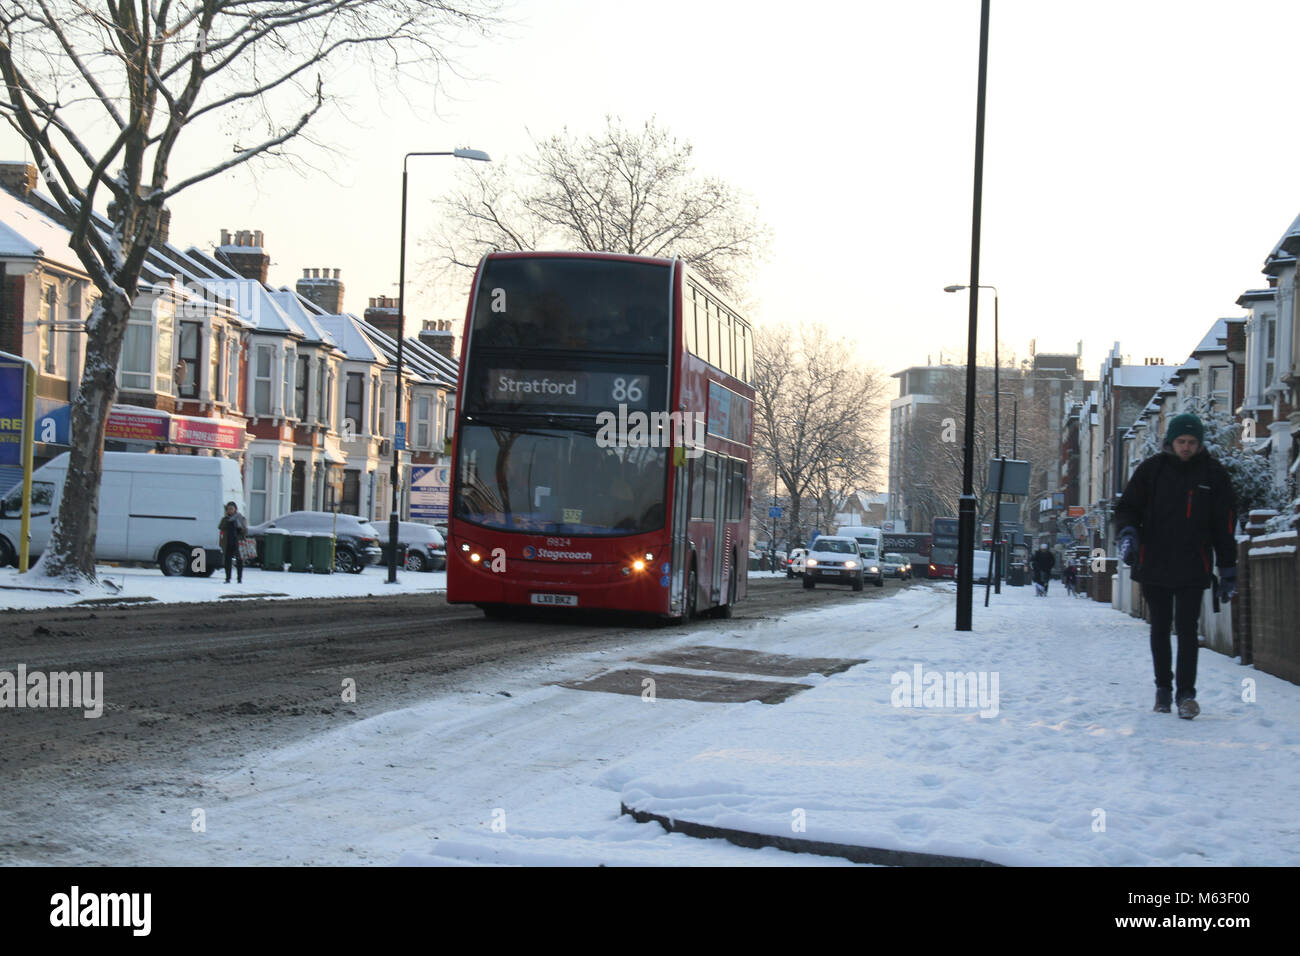 LONDON, UK - February 28: Streets of East London were covered with snow following  a shower on 28 February. The Met Department issued an amber warning causing airport closure and rail cancellation Credit: David Mbiyu/Alamy Live News Stock Photo